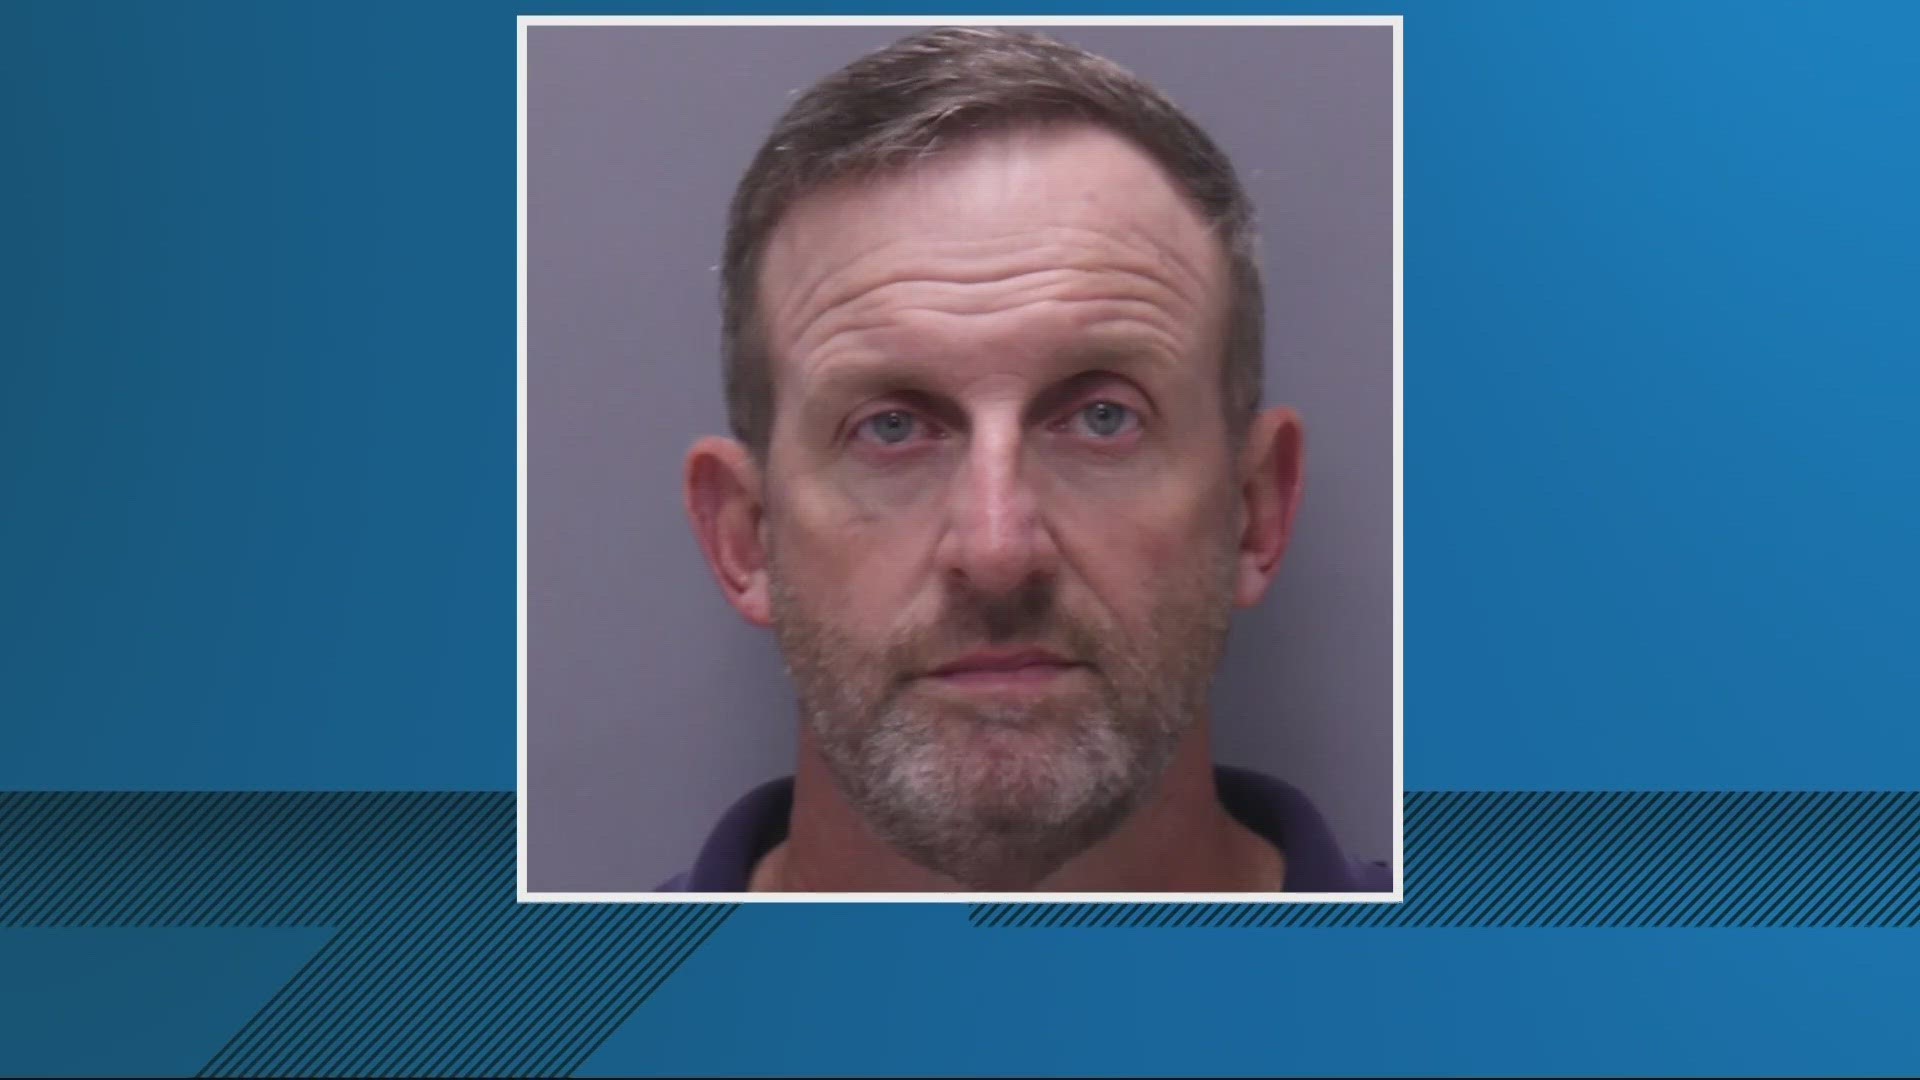 Deputies say Brandon Keith Franklin, 49, posed as a licensed contractor in multiple jurisdictions and has been associated with several business names.